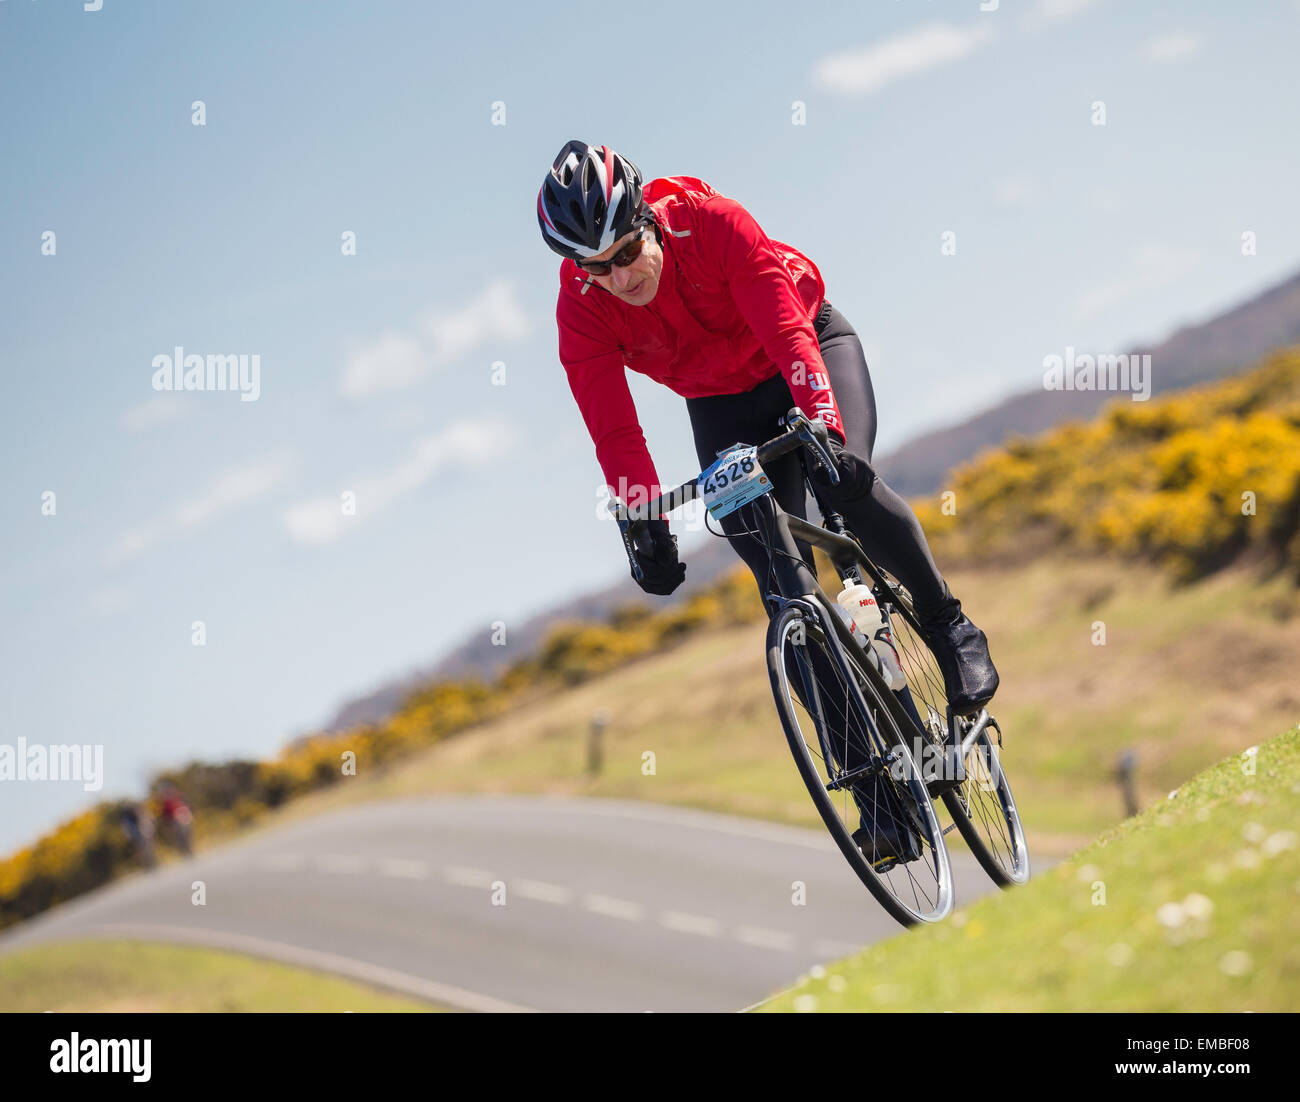 A male cyclist competes in the New Forest Wiggle Sportive event on a sunny Sunday in Spring Stock Photo